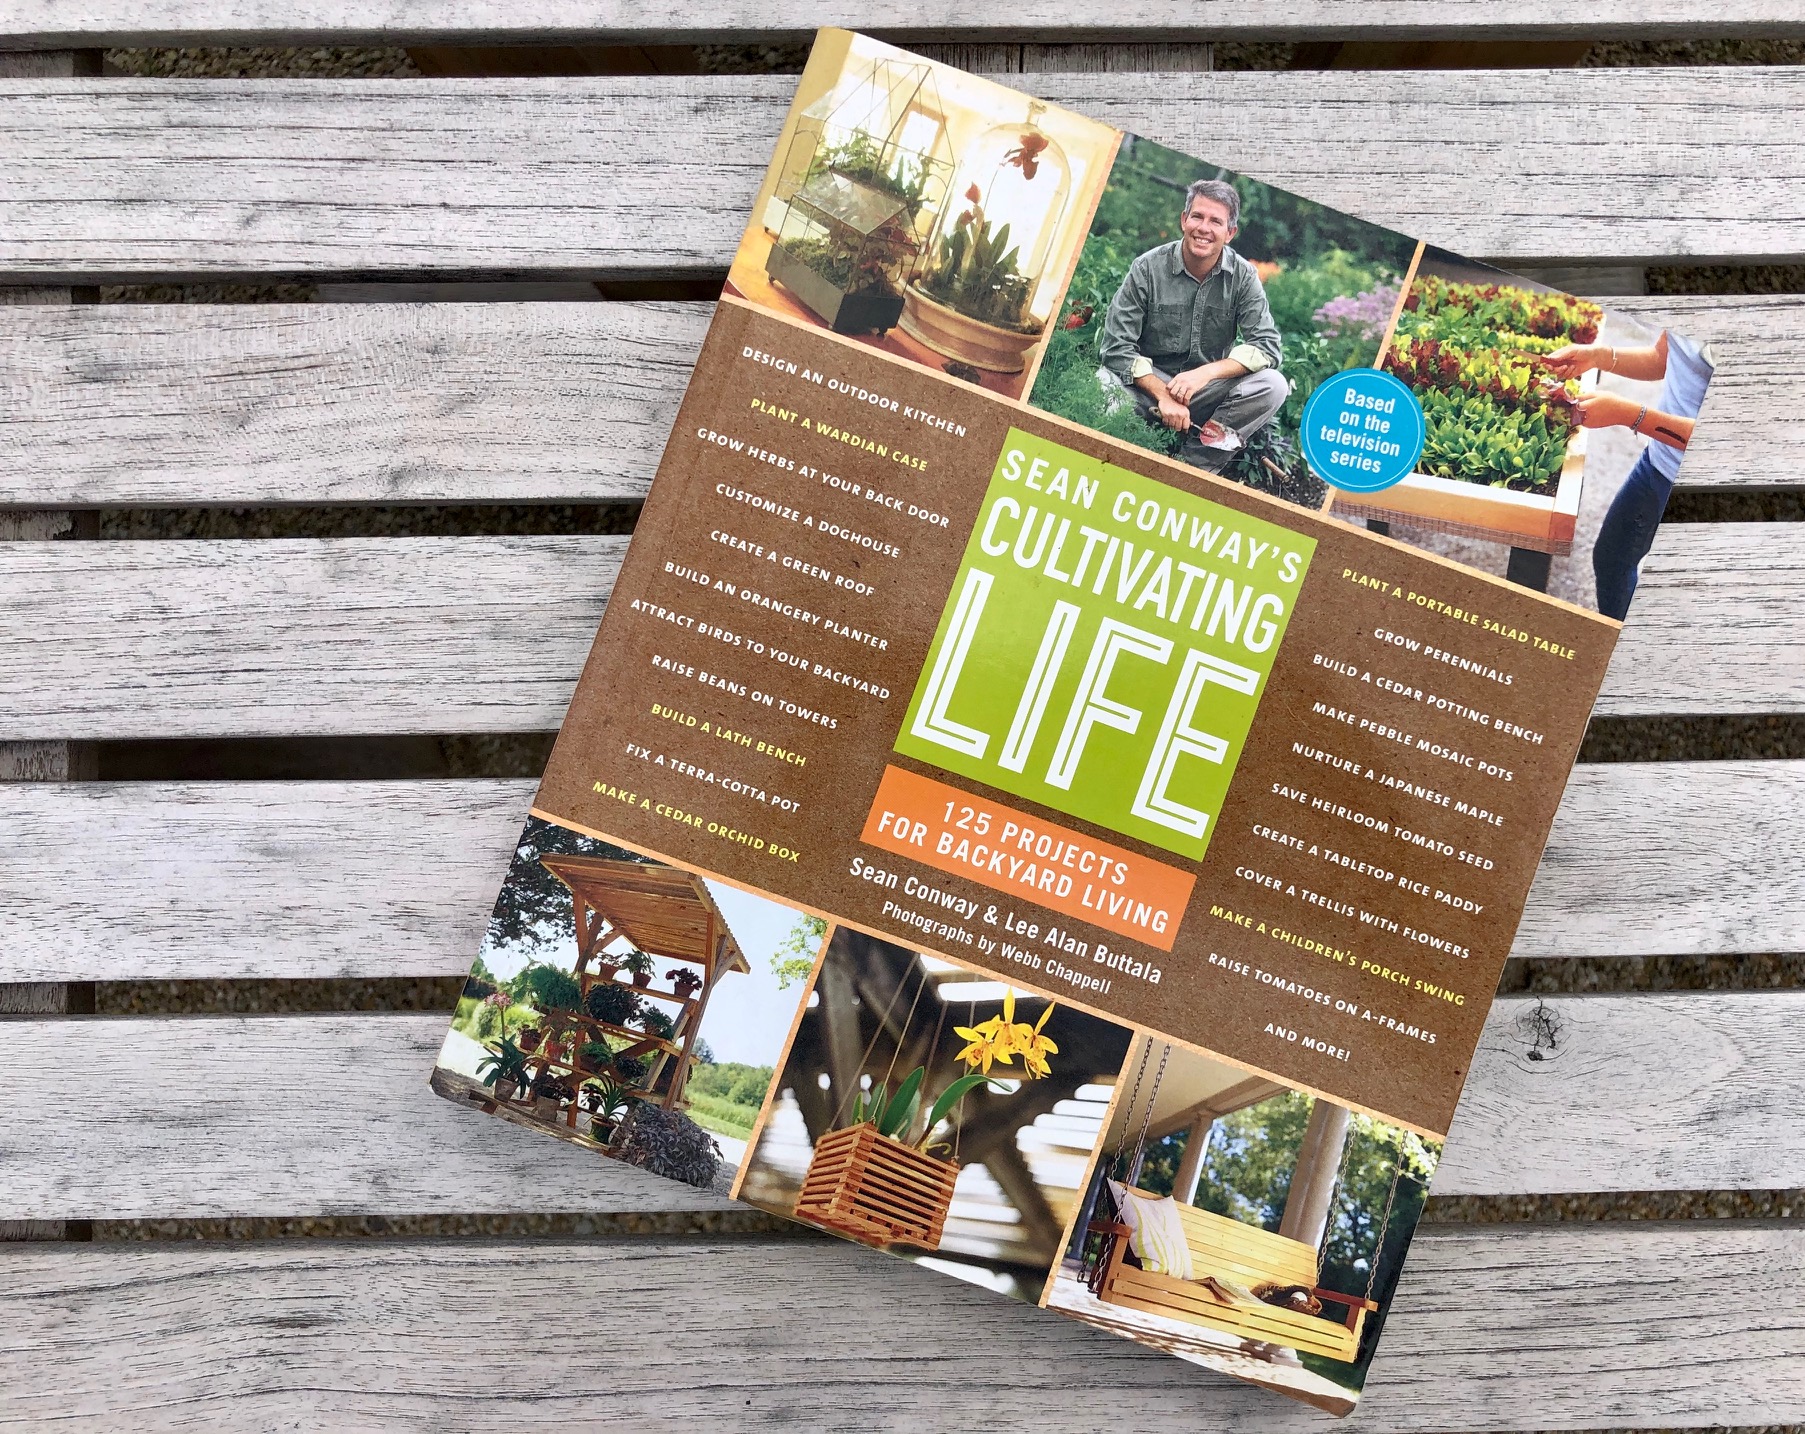 Sean Conway's Cultivating Life - Great book for garden projects - Thinking Outside the Boxwood